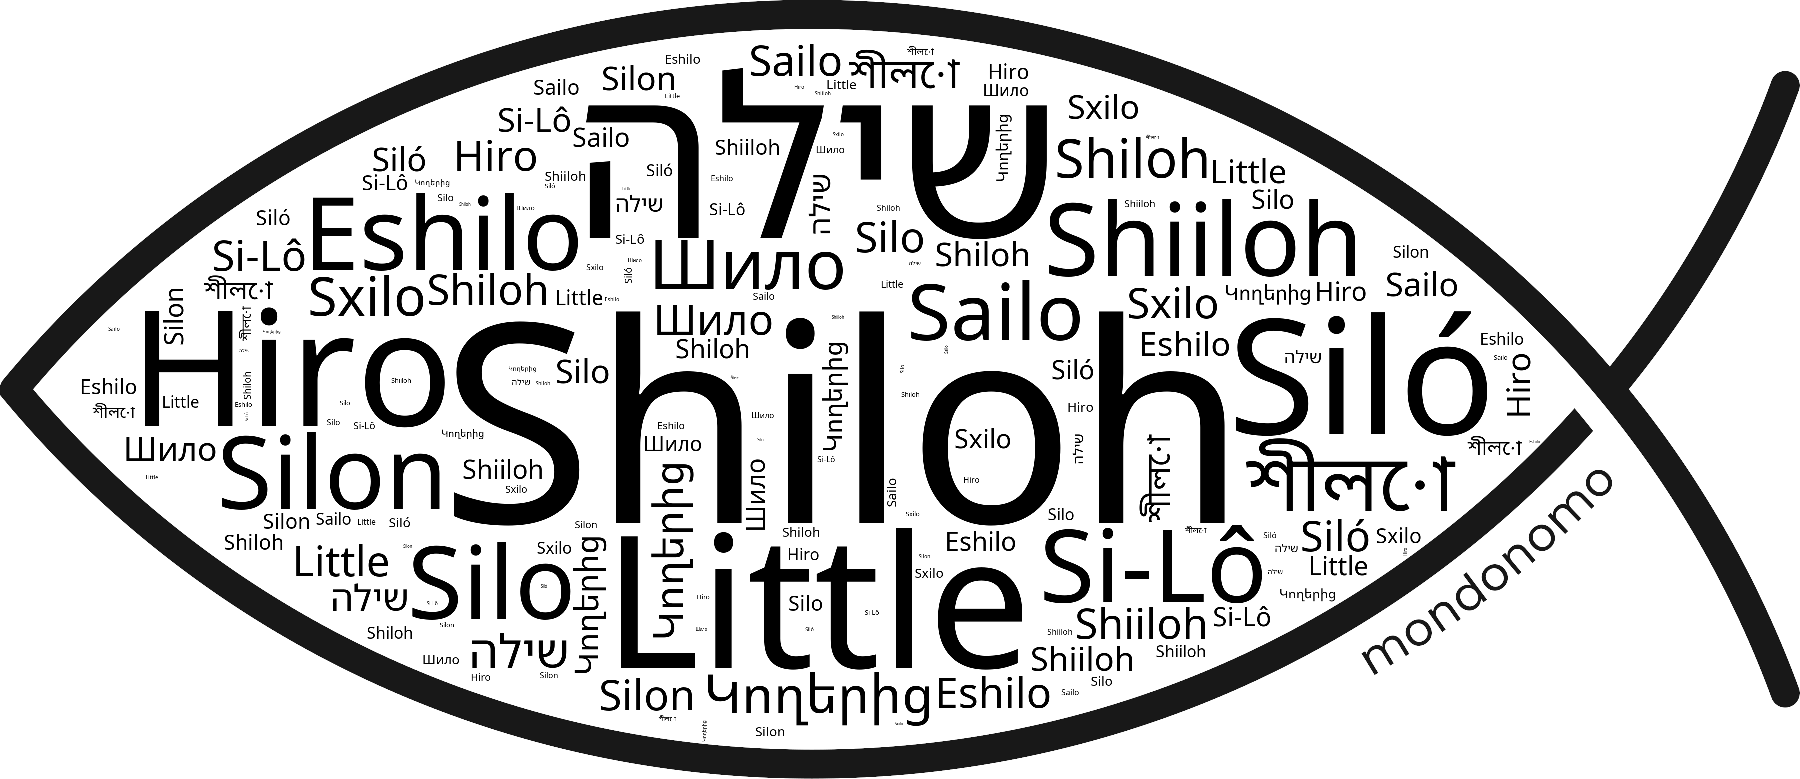 Name Shiloh in the world's Bibles